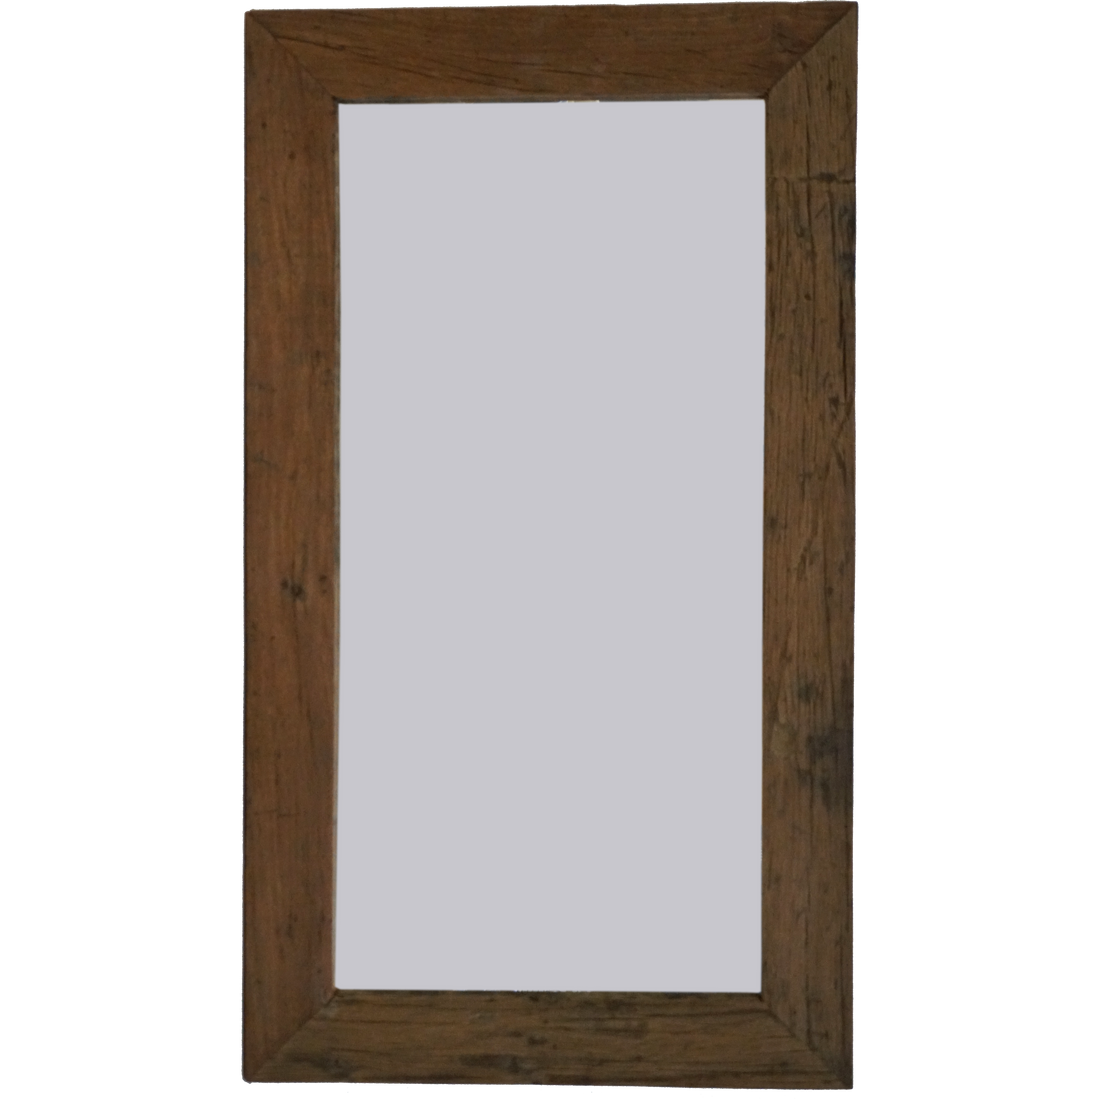 Trademark Living Laco beautiful mirror with wide wooden frame